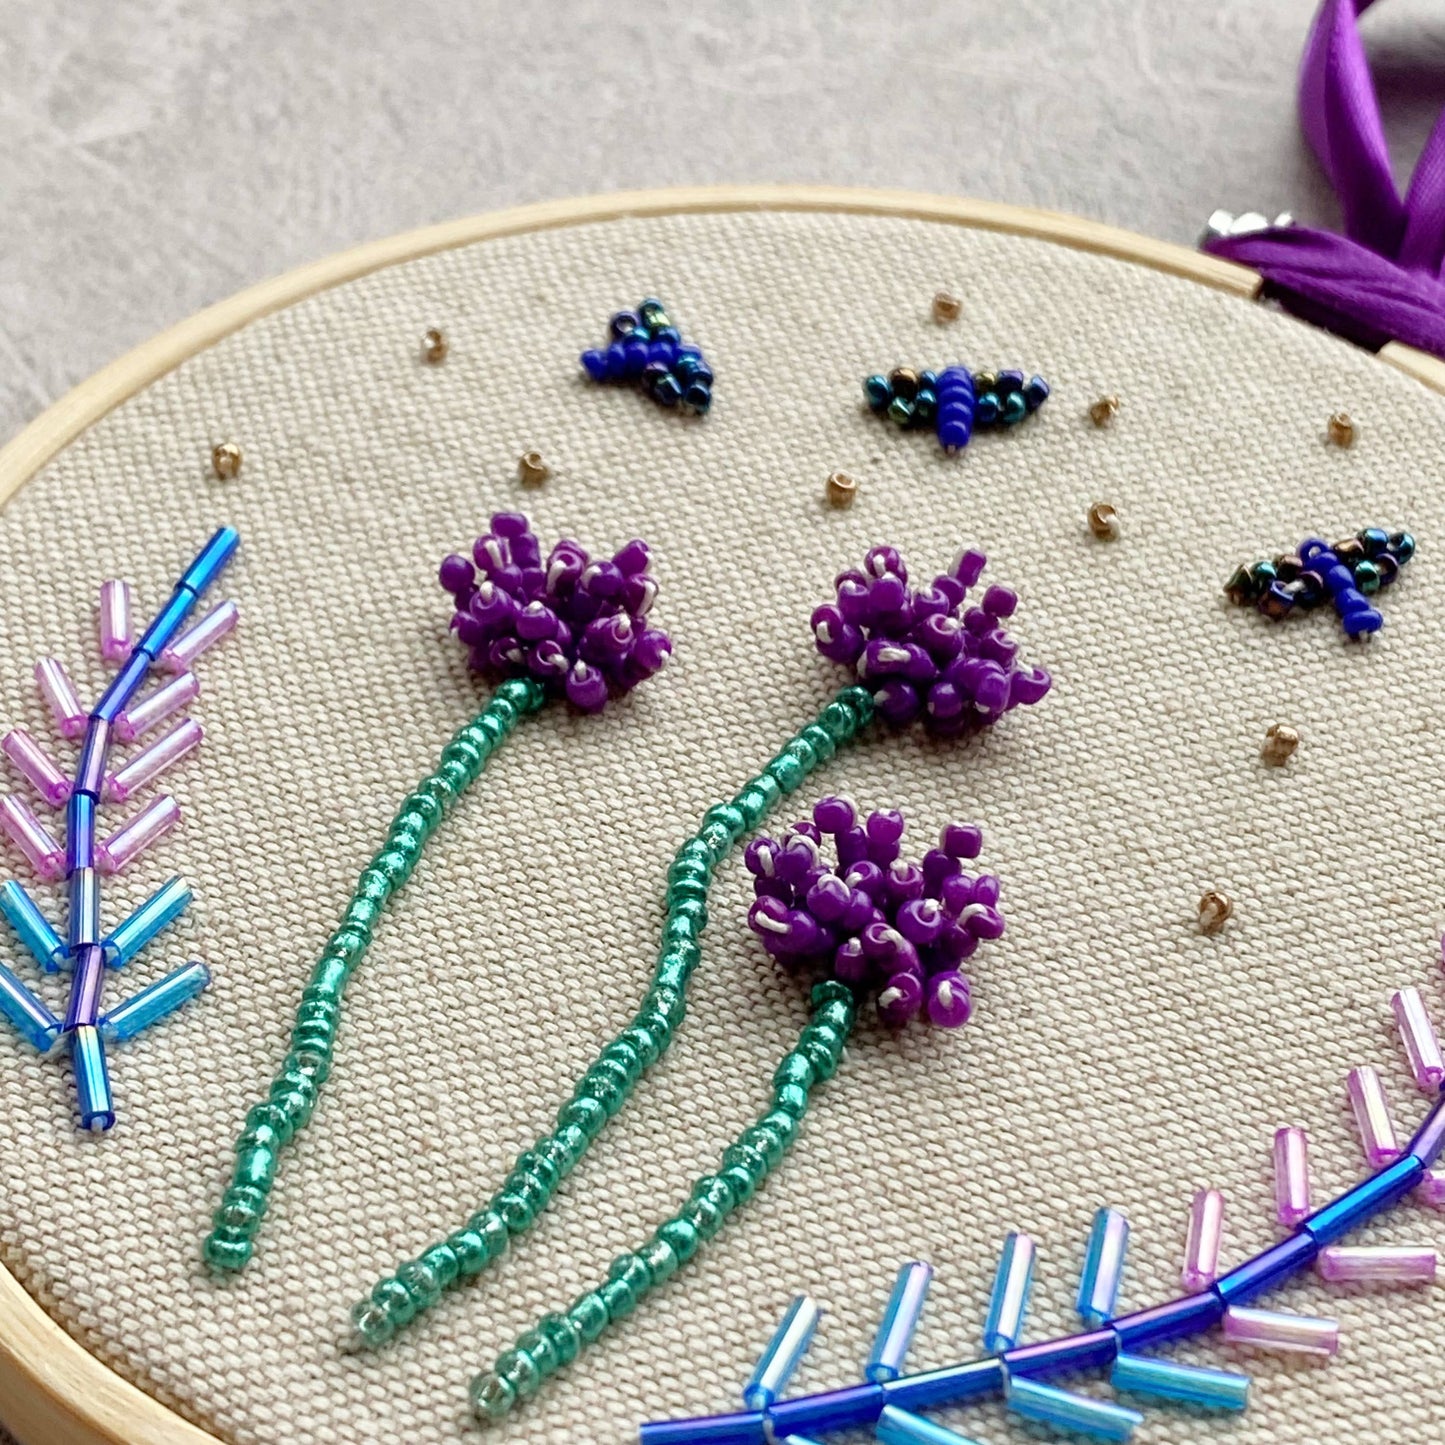 Clover Bead Embroidery Craft Kit